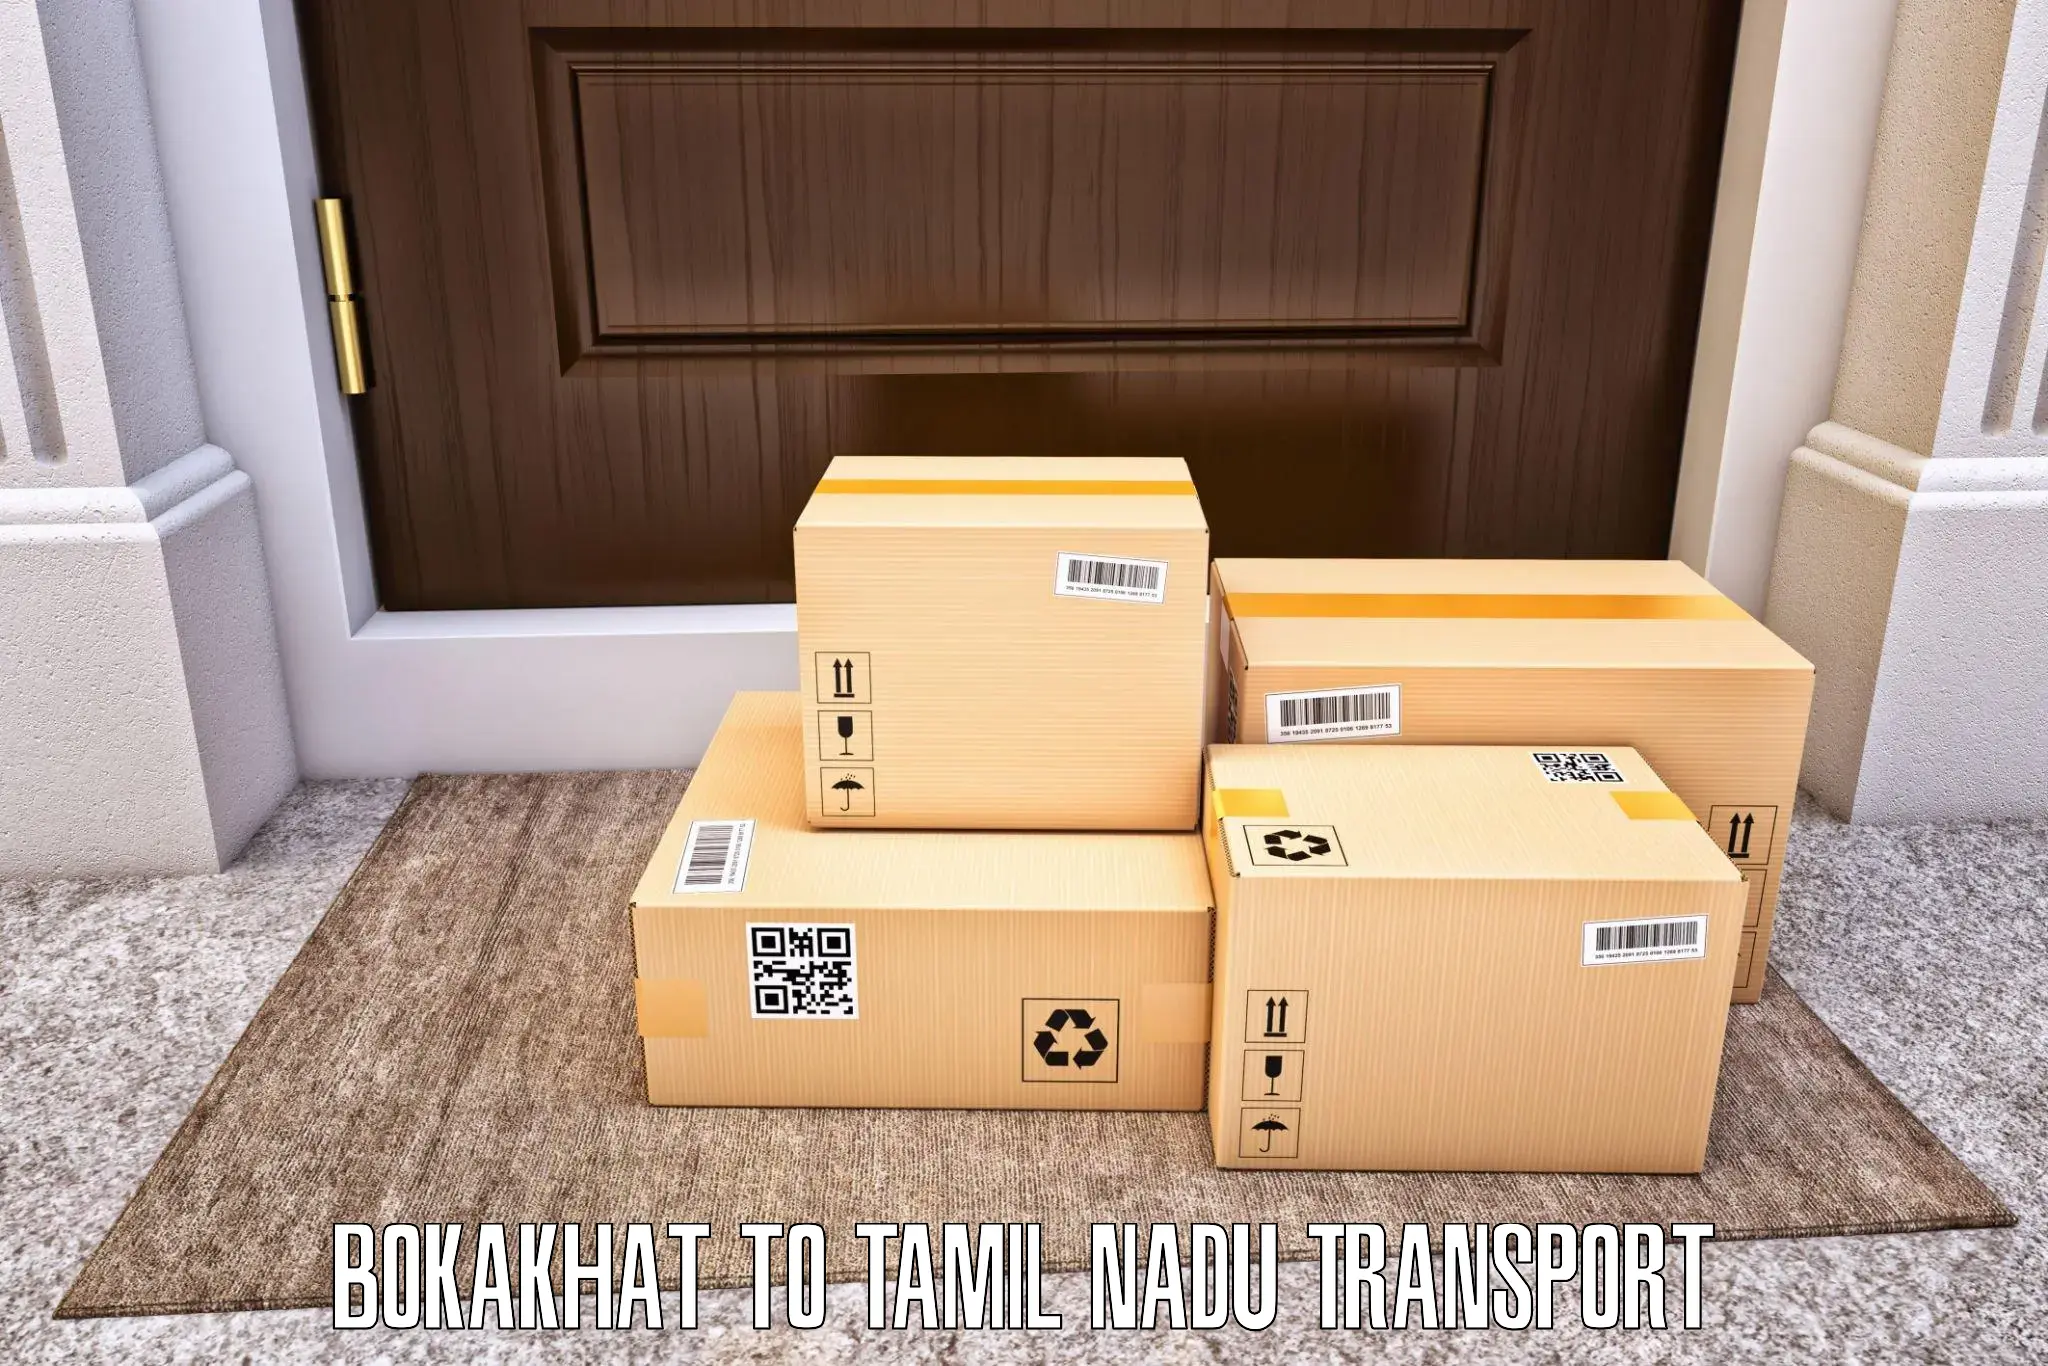 Part load transport service in India Bokakhat to Vedasandur